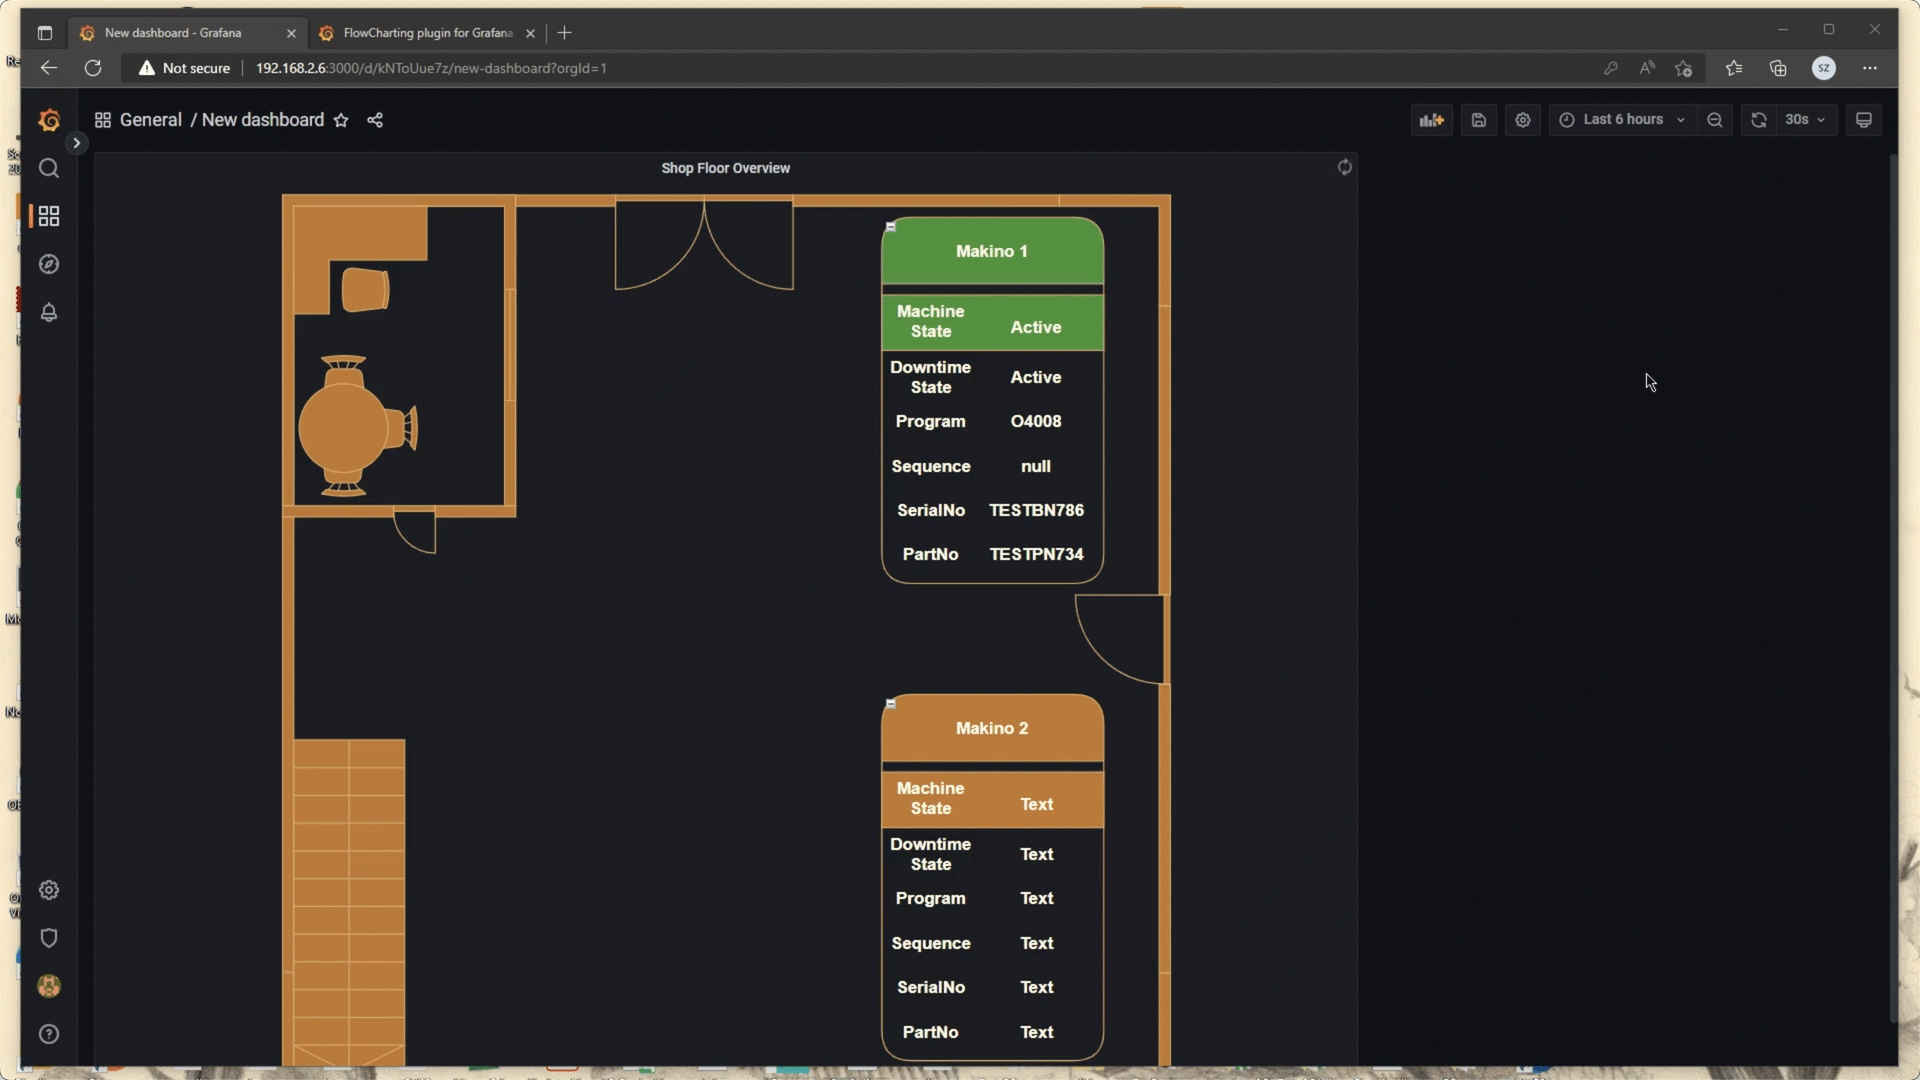 Update shapes in a diagram based on live data with diagrams.net, Grafana and the Flowcharting plugin